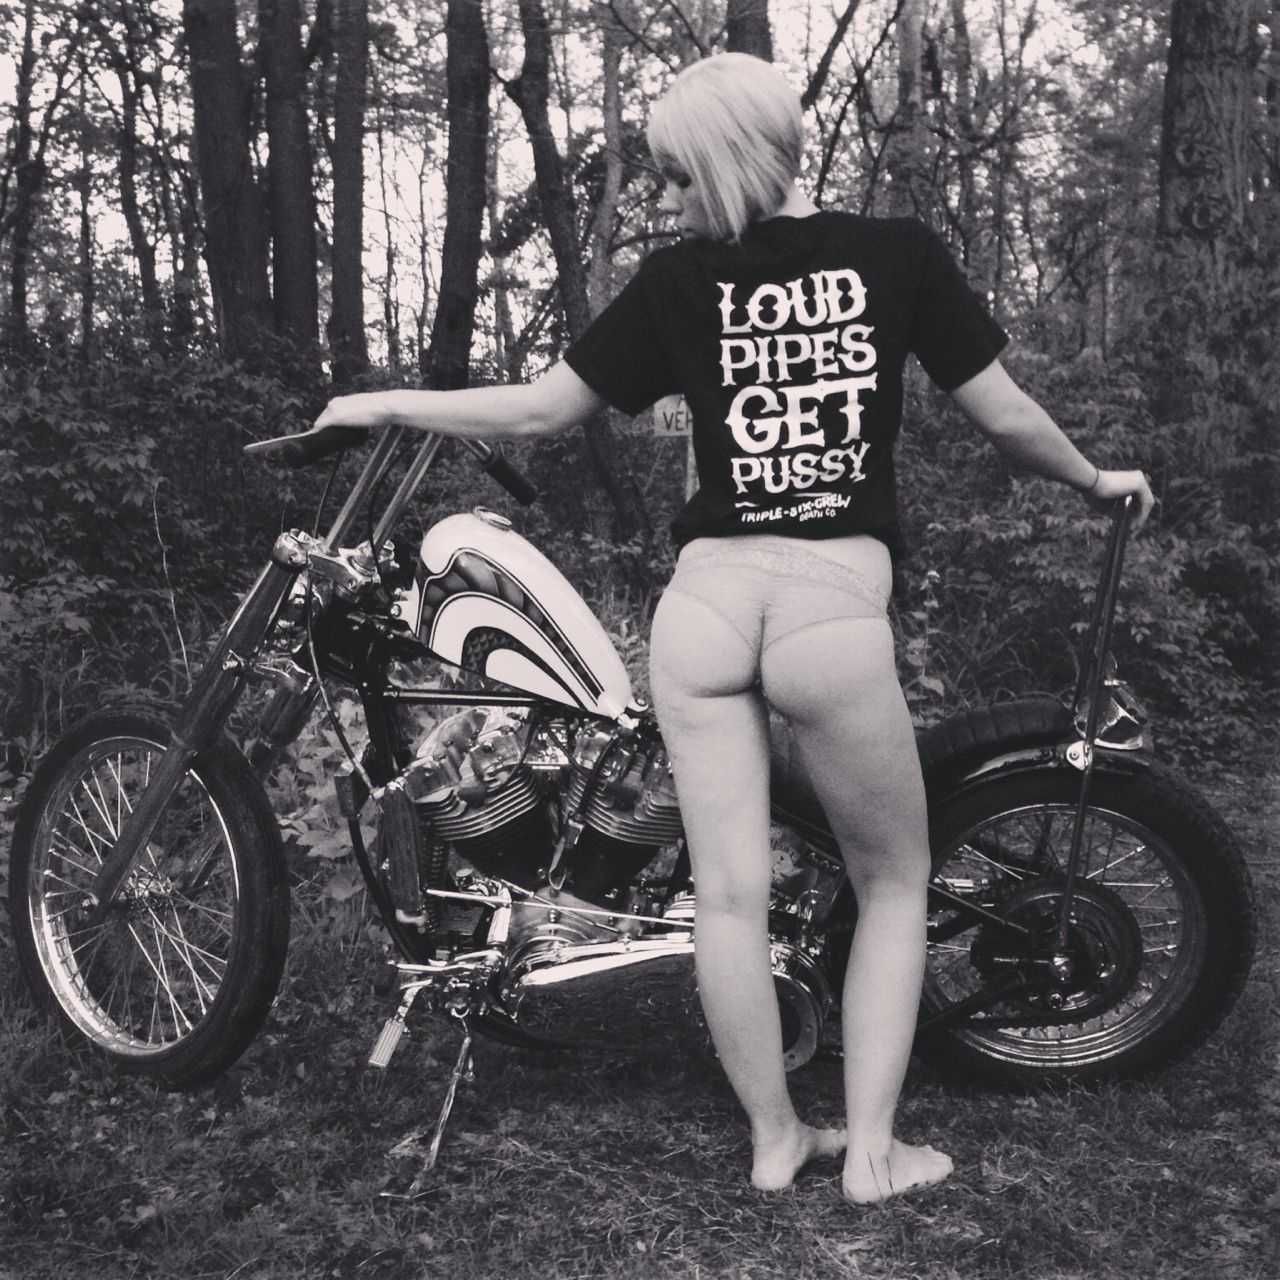 Girl showing pussy on motorcycles